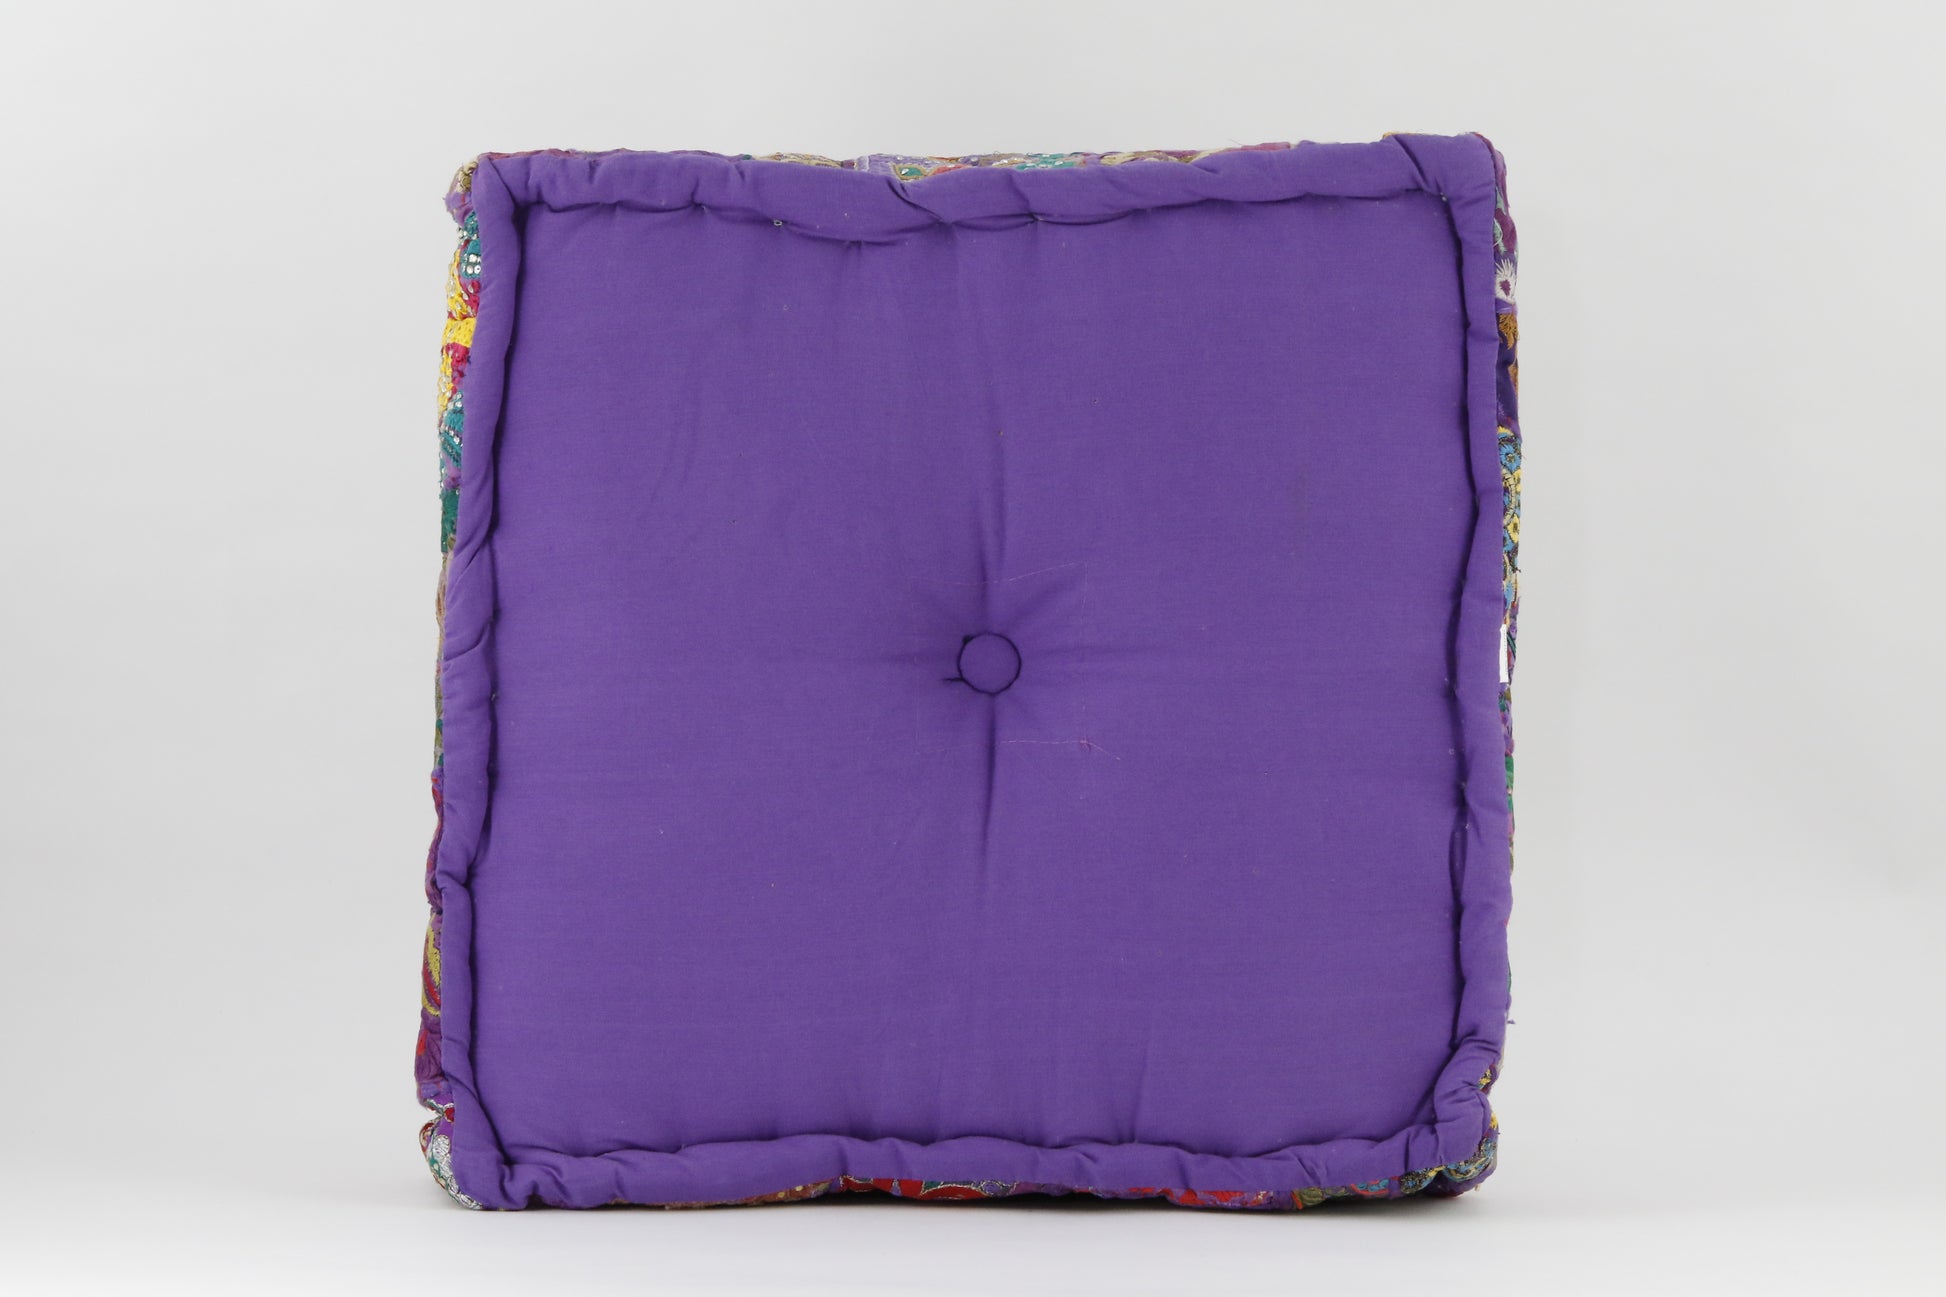 MEDITATION CUSHION PURPLE EMBROIDERED SQUARE BACK VIEW